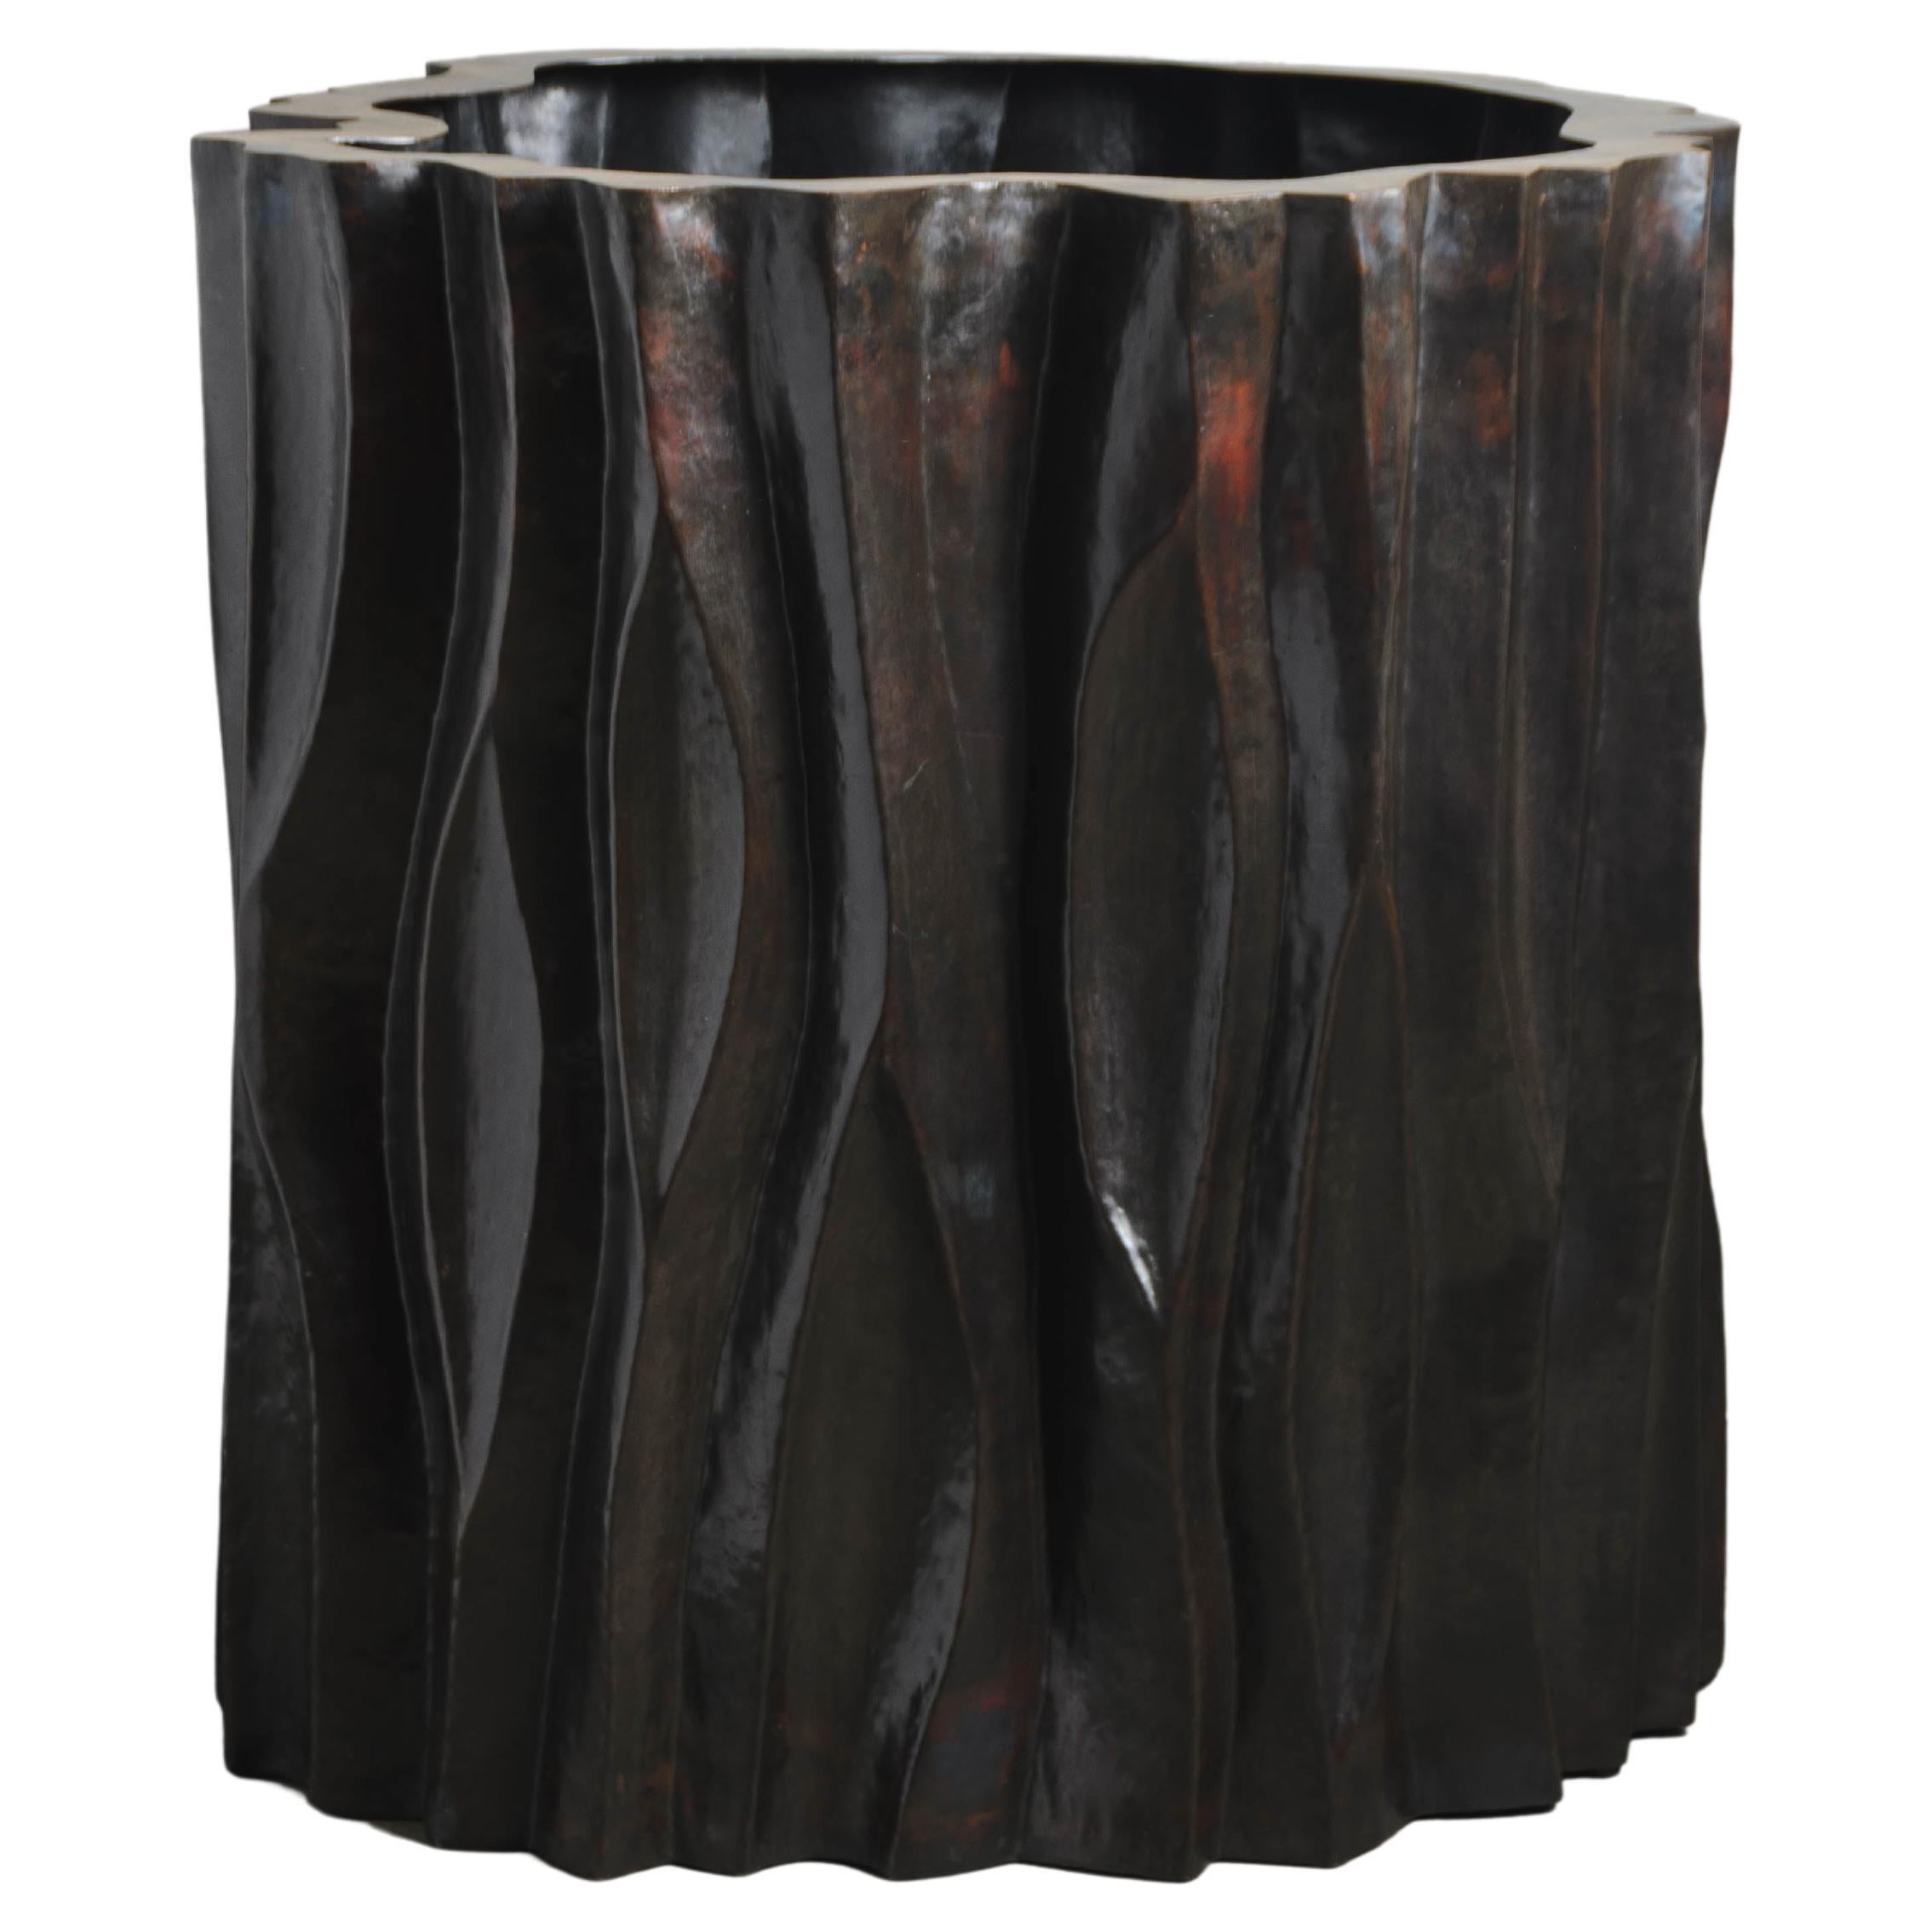 Contemporary Repoussé Large Tree Trunk Pot in Dark Antique Copper by Robert Kuo